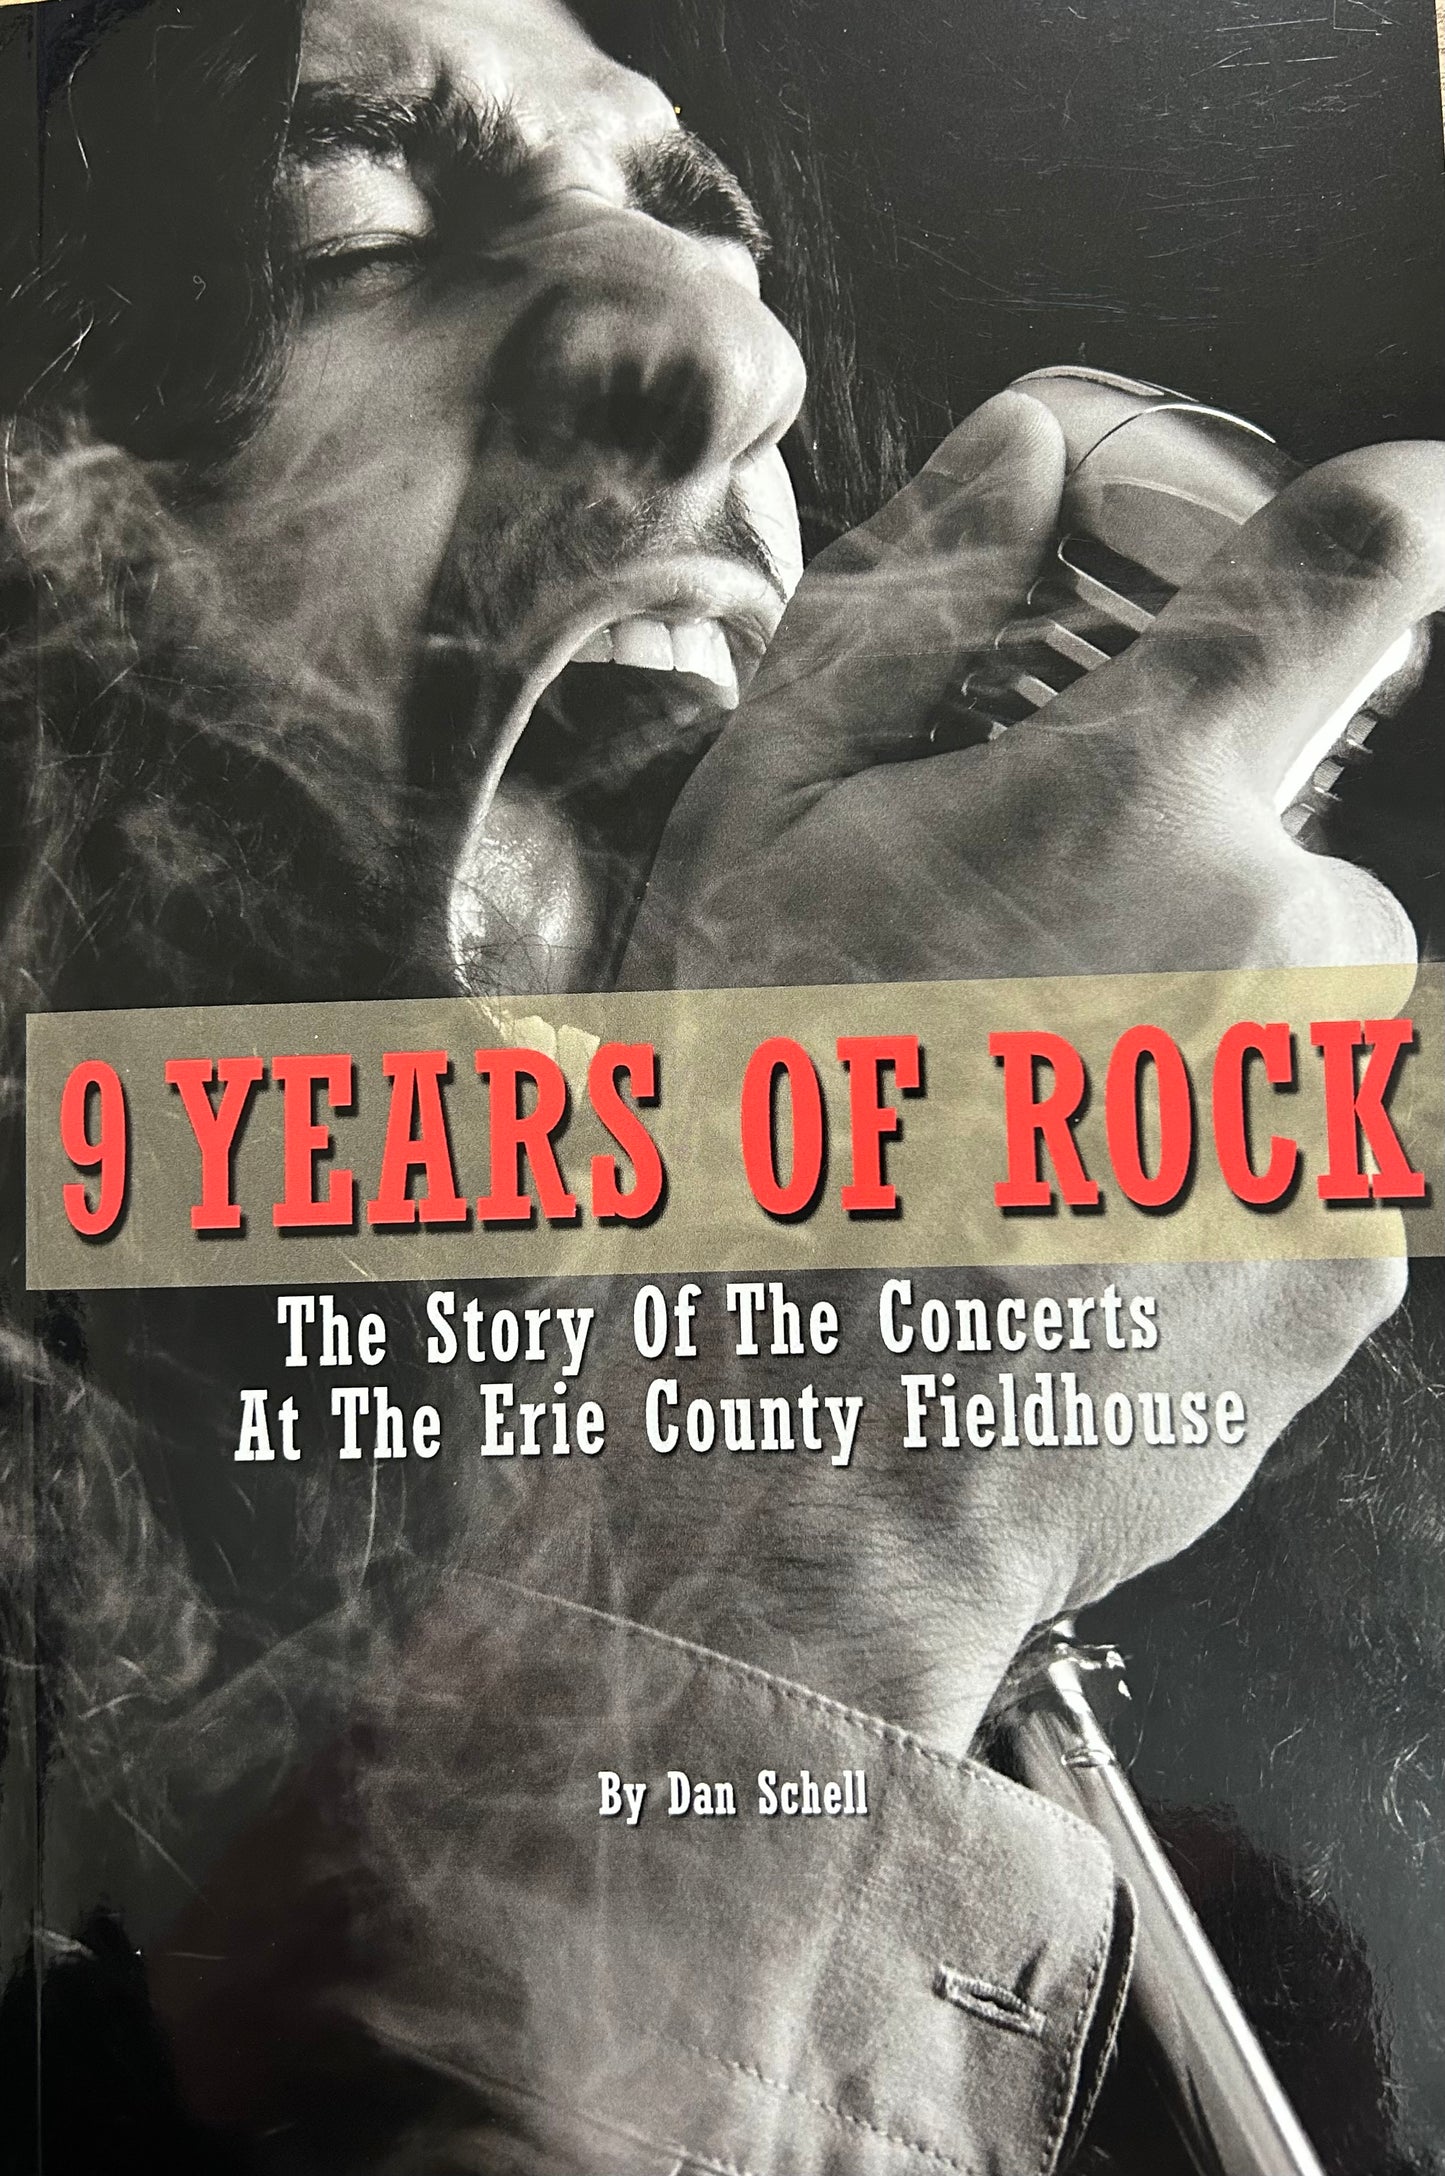 9 Years of Rock